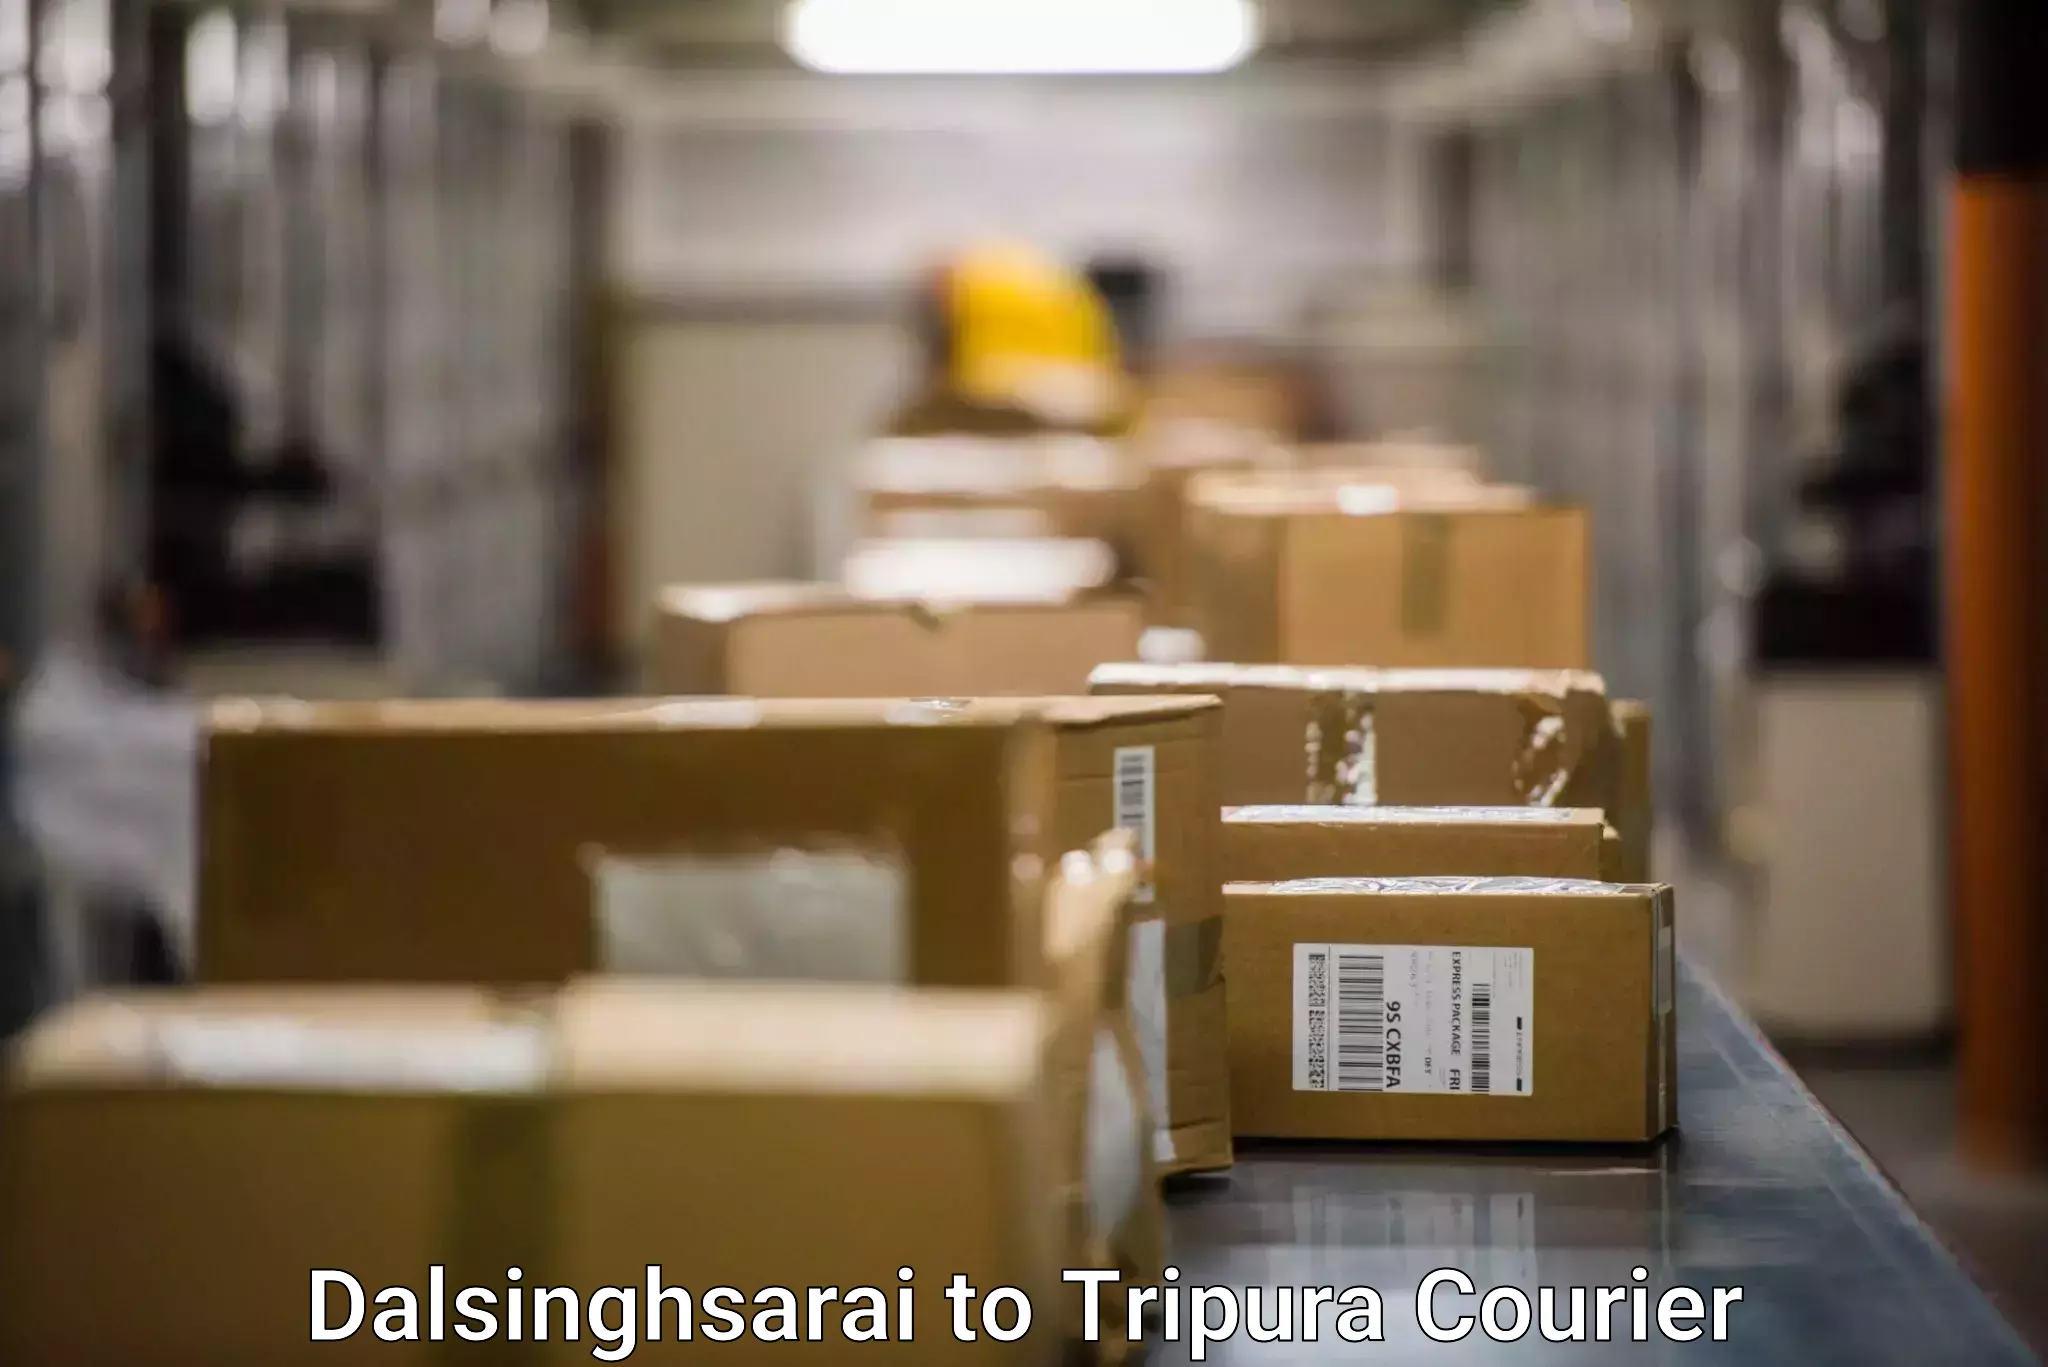 Weekend courier service Dalsinghsarai to Dhalai